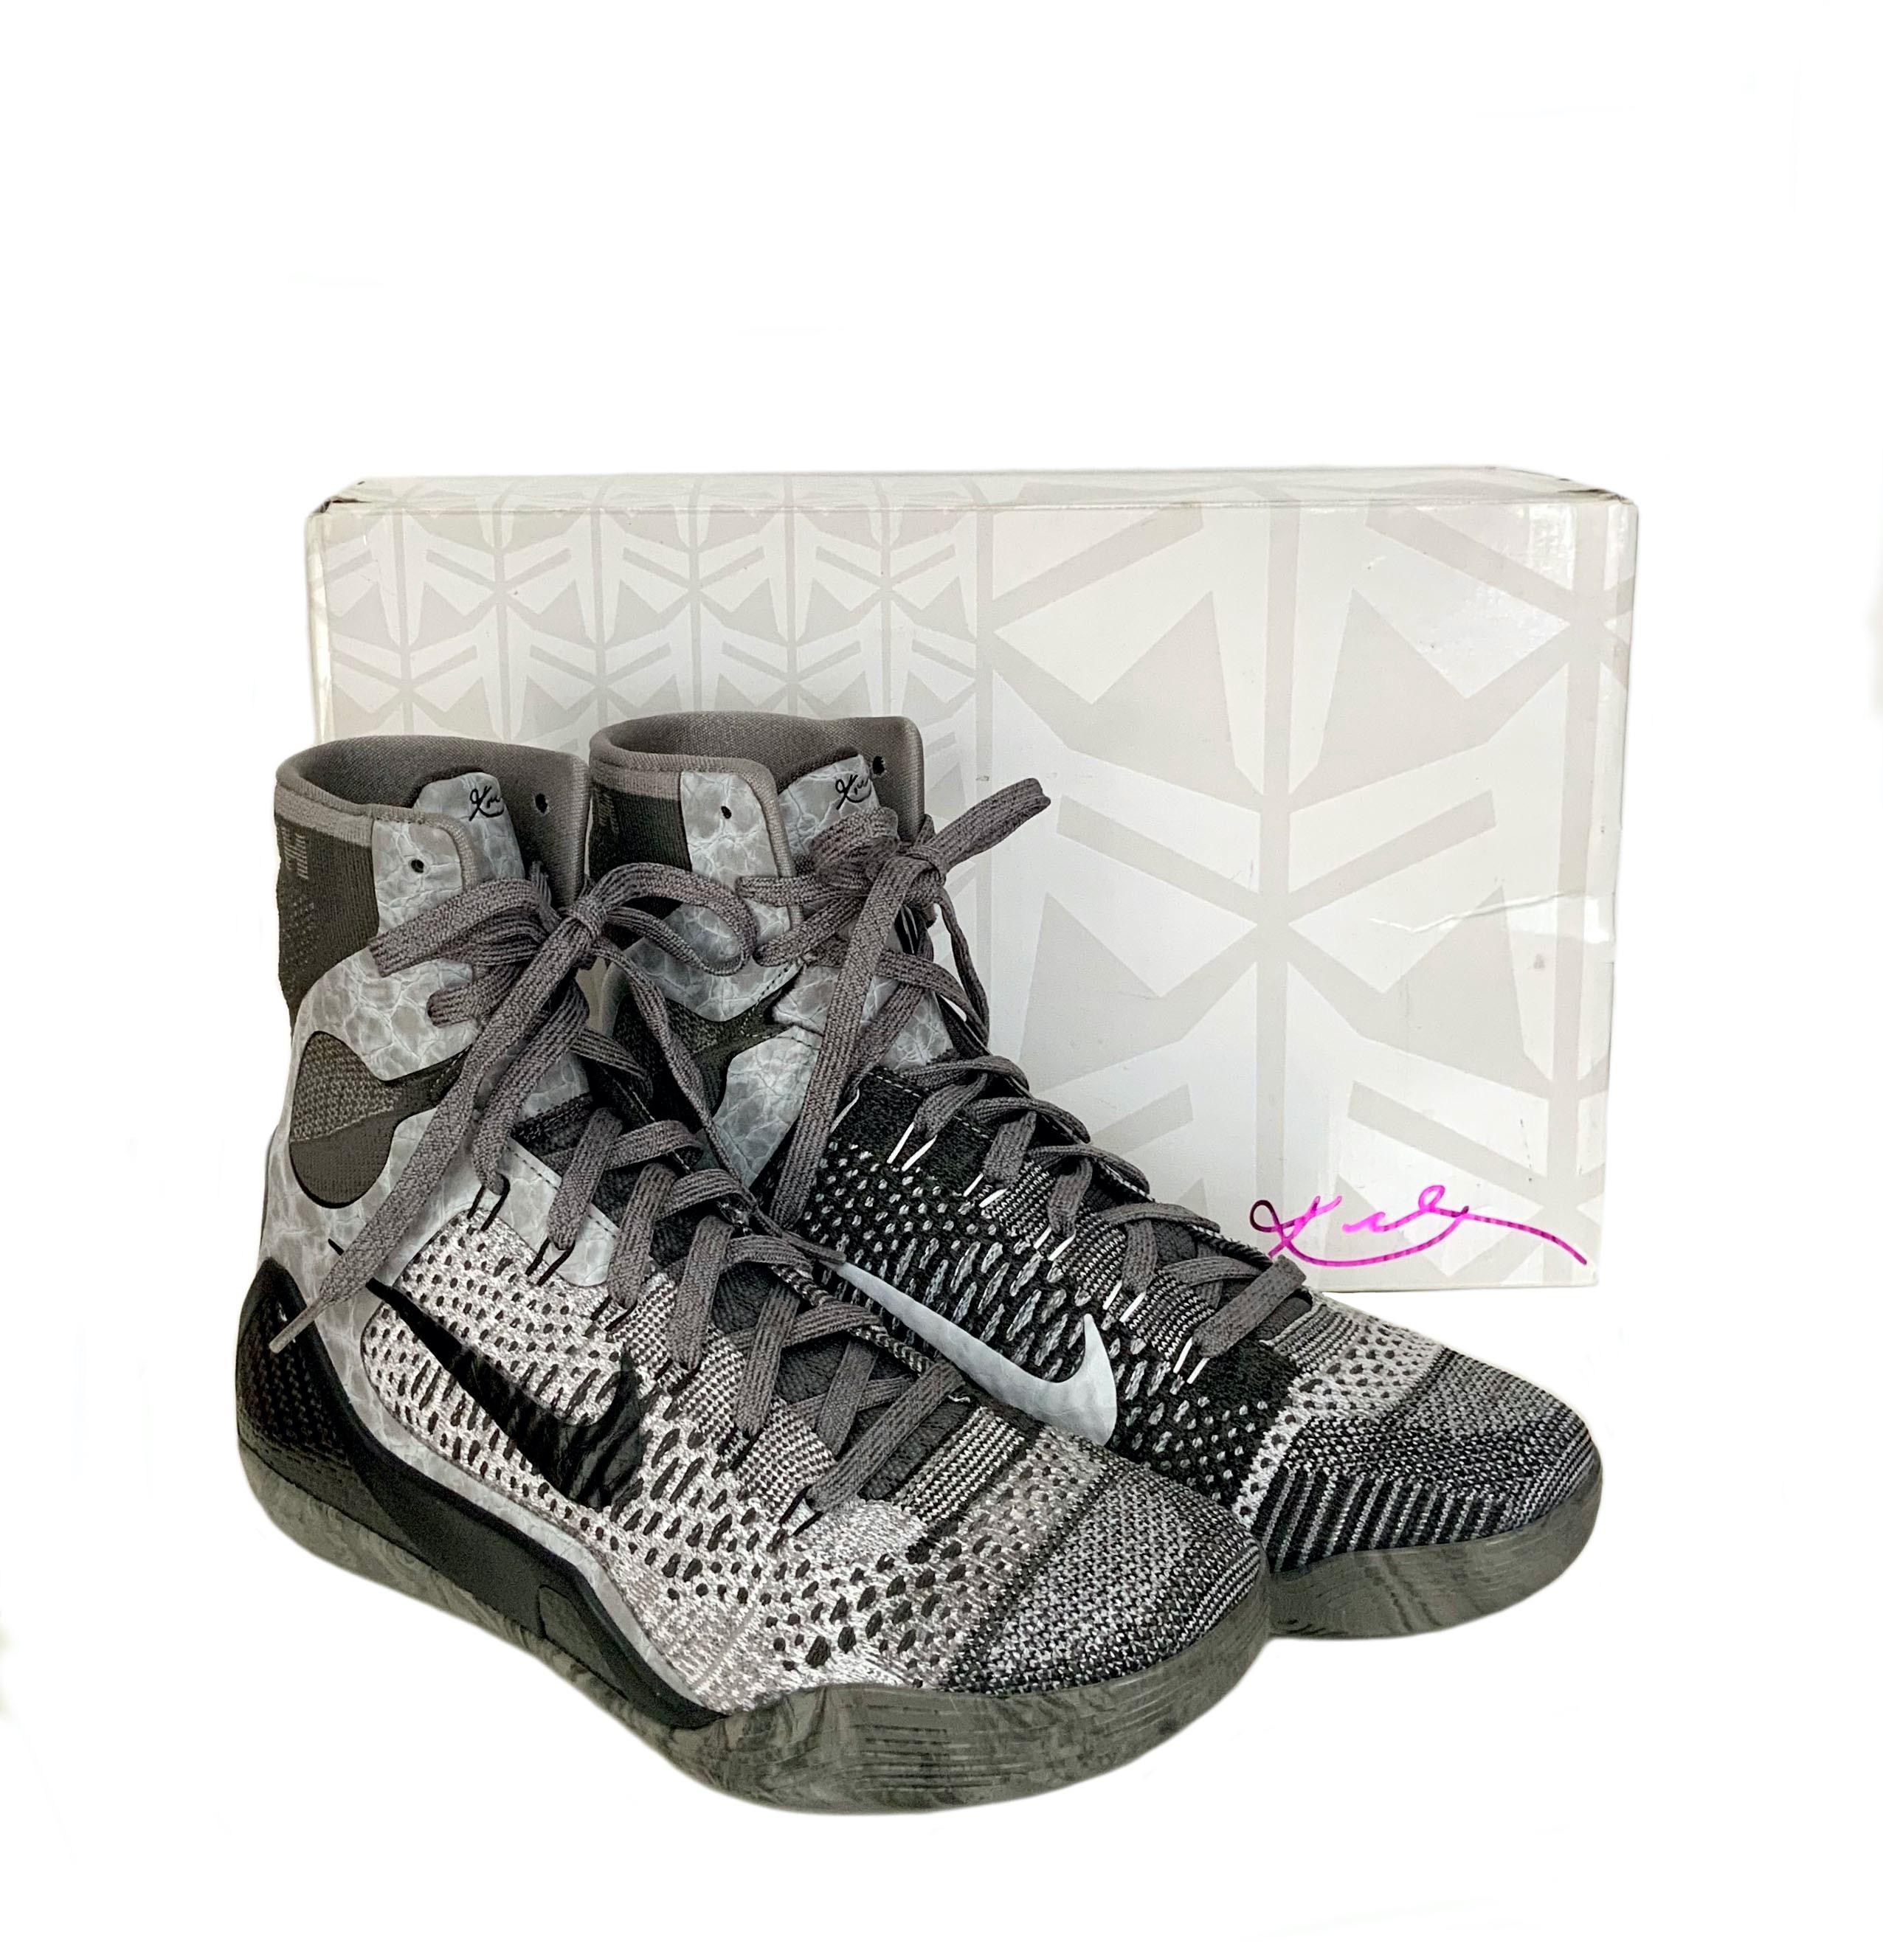 The details of the Nike Kobe 9 Elite sneakers celebrate the relentless and passionate approach of Kobe Bryant for life and basketball.
The top features a stem with tone-on-tone overlays along the ankle and heel.
A lace-up closure, carbon fiber